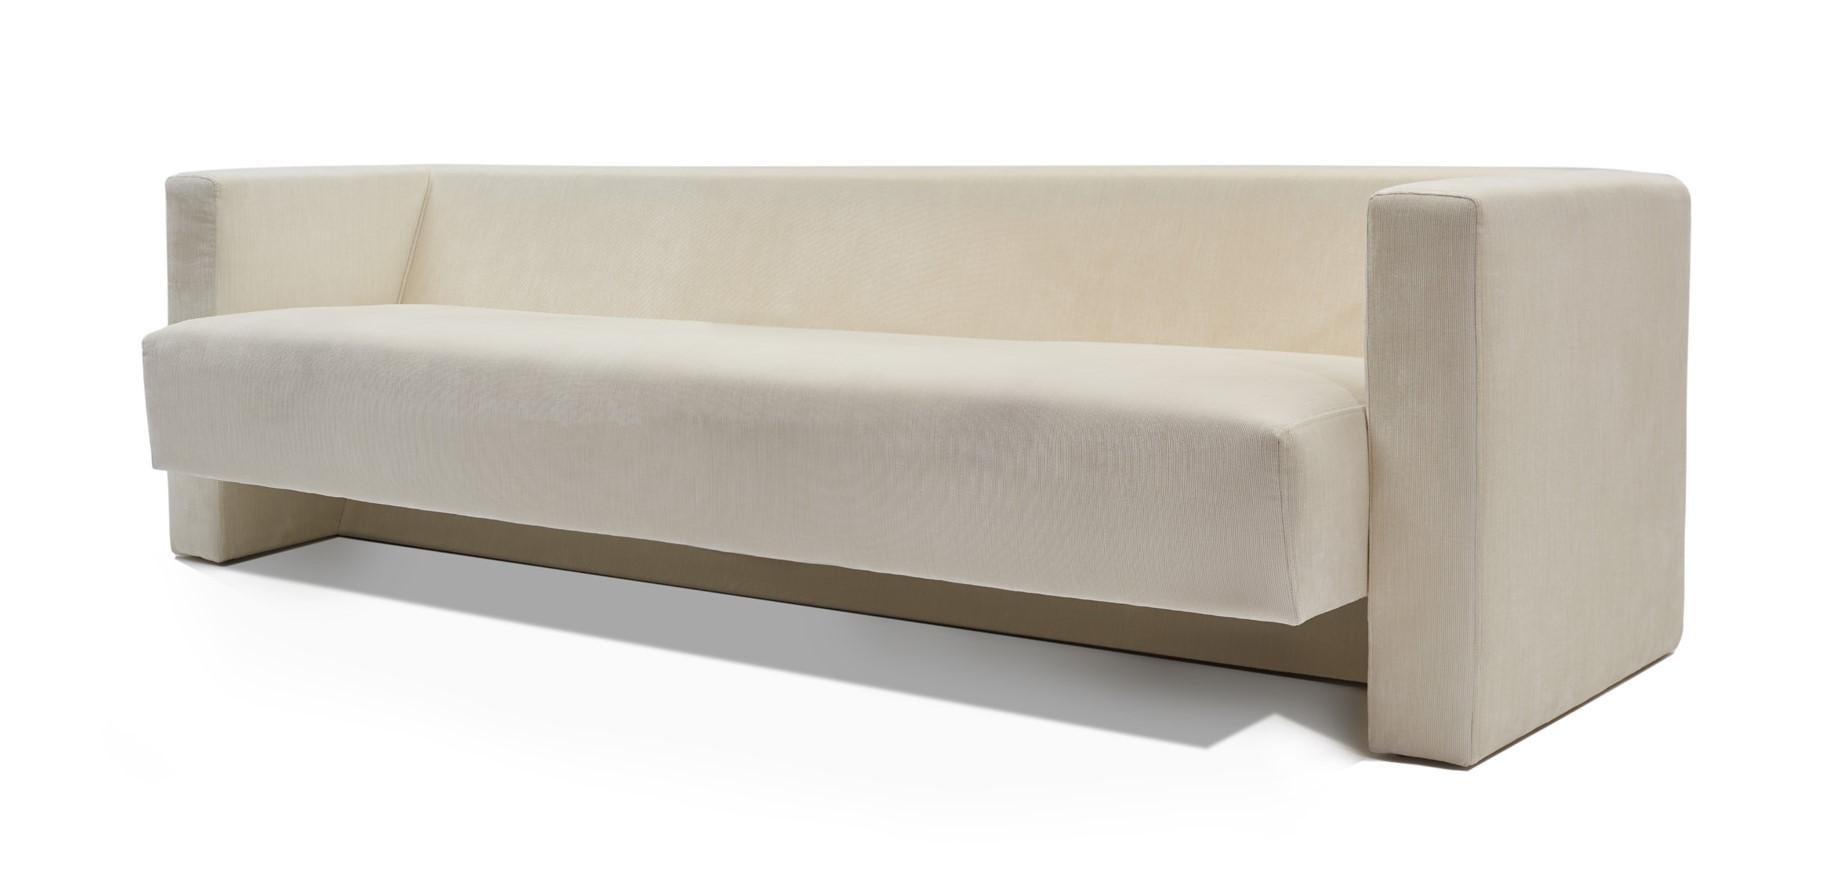 The Minimalist lines of the ice velvet sofa inspired by John Lautner's 1970s interiors, create a contemporary yet timeless piece. The softness and luxury of the velvet contrasts with the rigid lines of its design, where form follows function, and